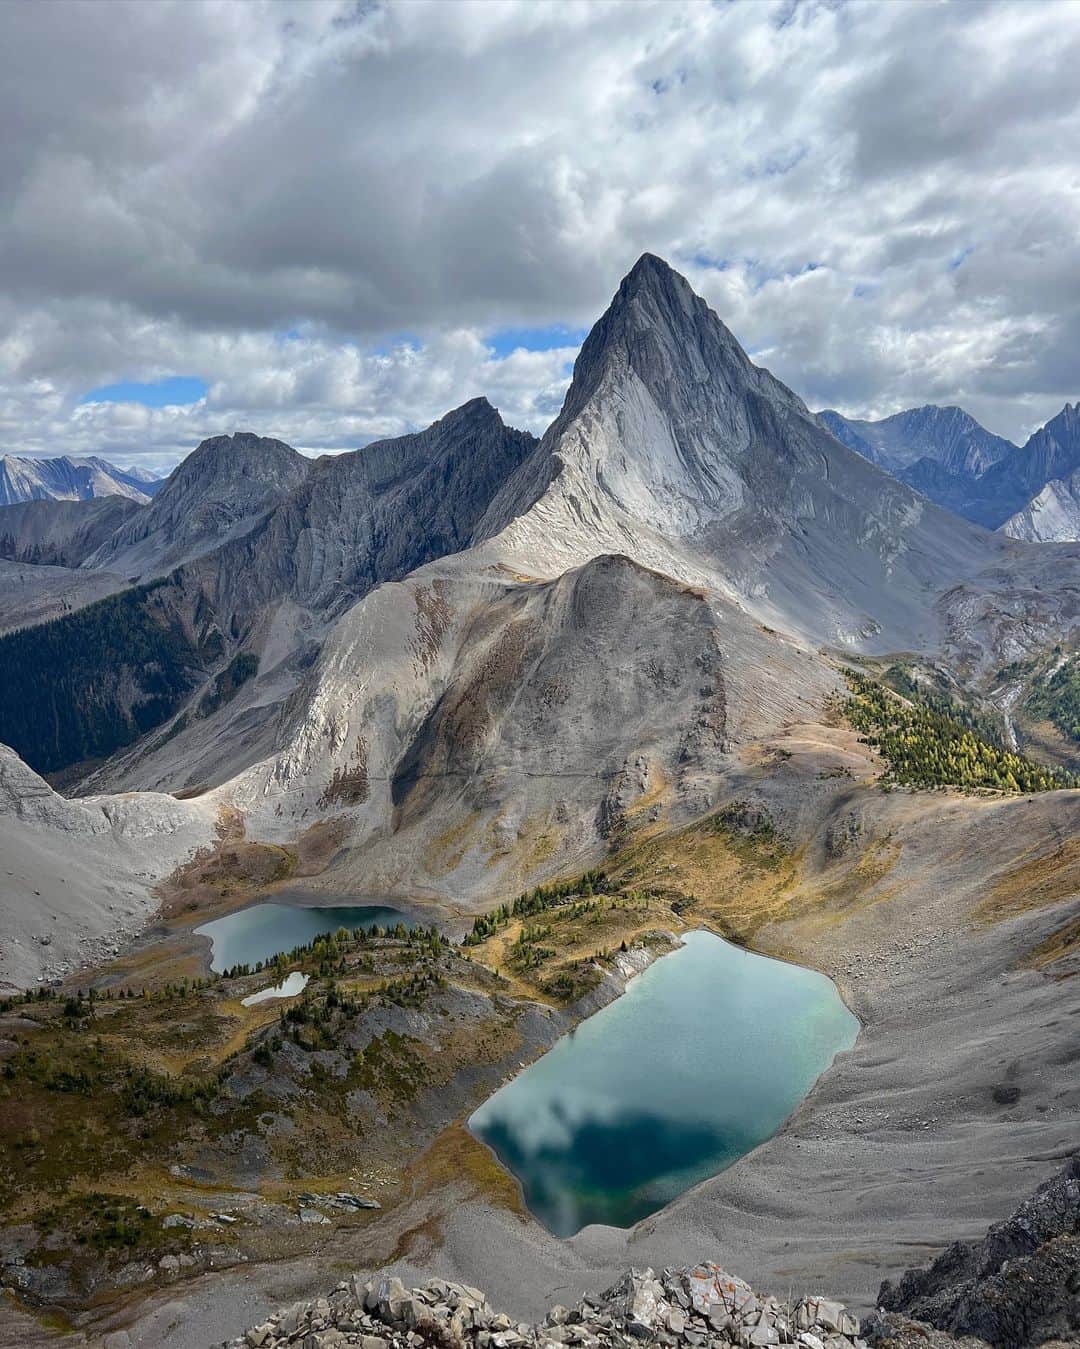 Zanna Van Dijkさんのインスタグラム写真 - (Zanna Van DijkInstagram)「📍Smutwood Peak, Kananaskis 🇨🇦  Tag someone you want to conquer this route with! 🥾   Guys, this was one of the best hikes of my LIFE 😭 It’s the route which inspired our whole trip to the Kananaskis region of the Rockies and it surpassed all our expectations!! The views and landscapes were truly breathtaking. Add it to your hiking bucket list ASAP! ☑️   Here’s the deets: ➡️ Distance: 19km ➡️ Elevation gain: 1000m  ➡️ Difficulty: Hard. The climb is long, steep & relentless. As you near the summit the path narrows then disappears and you have to scramble over scree covered rocks. If you’re not feeling it, you can stop before the scramble and you still get amazing views 👌🏼  ➡️ Location: The trailhead is a short walk from @mountengadine lodge where we stayed. Otherwise you can drive in from Canmore in 45mins-1hr. The drive is STUNNING, but the road to the trailhead is unpaved so ensure you have a suitable car.  See more of the route on my stories! I’m happy to answer any other questions you have! I’ll be listing all our favourite hikes in a travel guide 🇨🇦♥️ #mountsmutwood #smutwood #smutwoodpeak #kananaskis #kananaskiscountry #kananaskisalberta」9月15日 0時03分 - zannavandijk